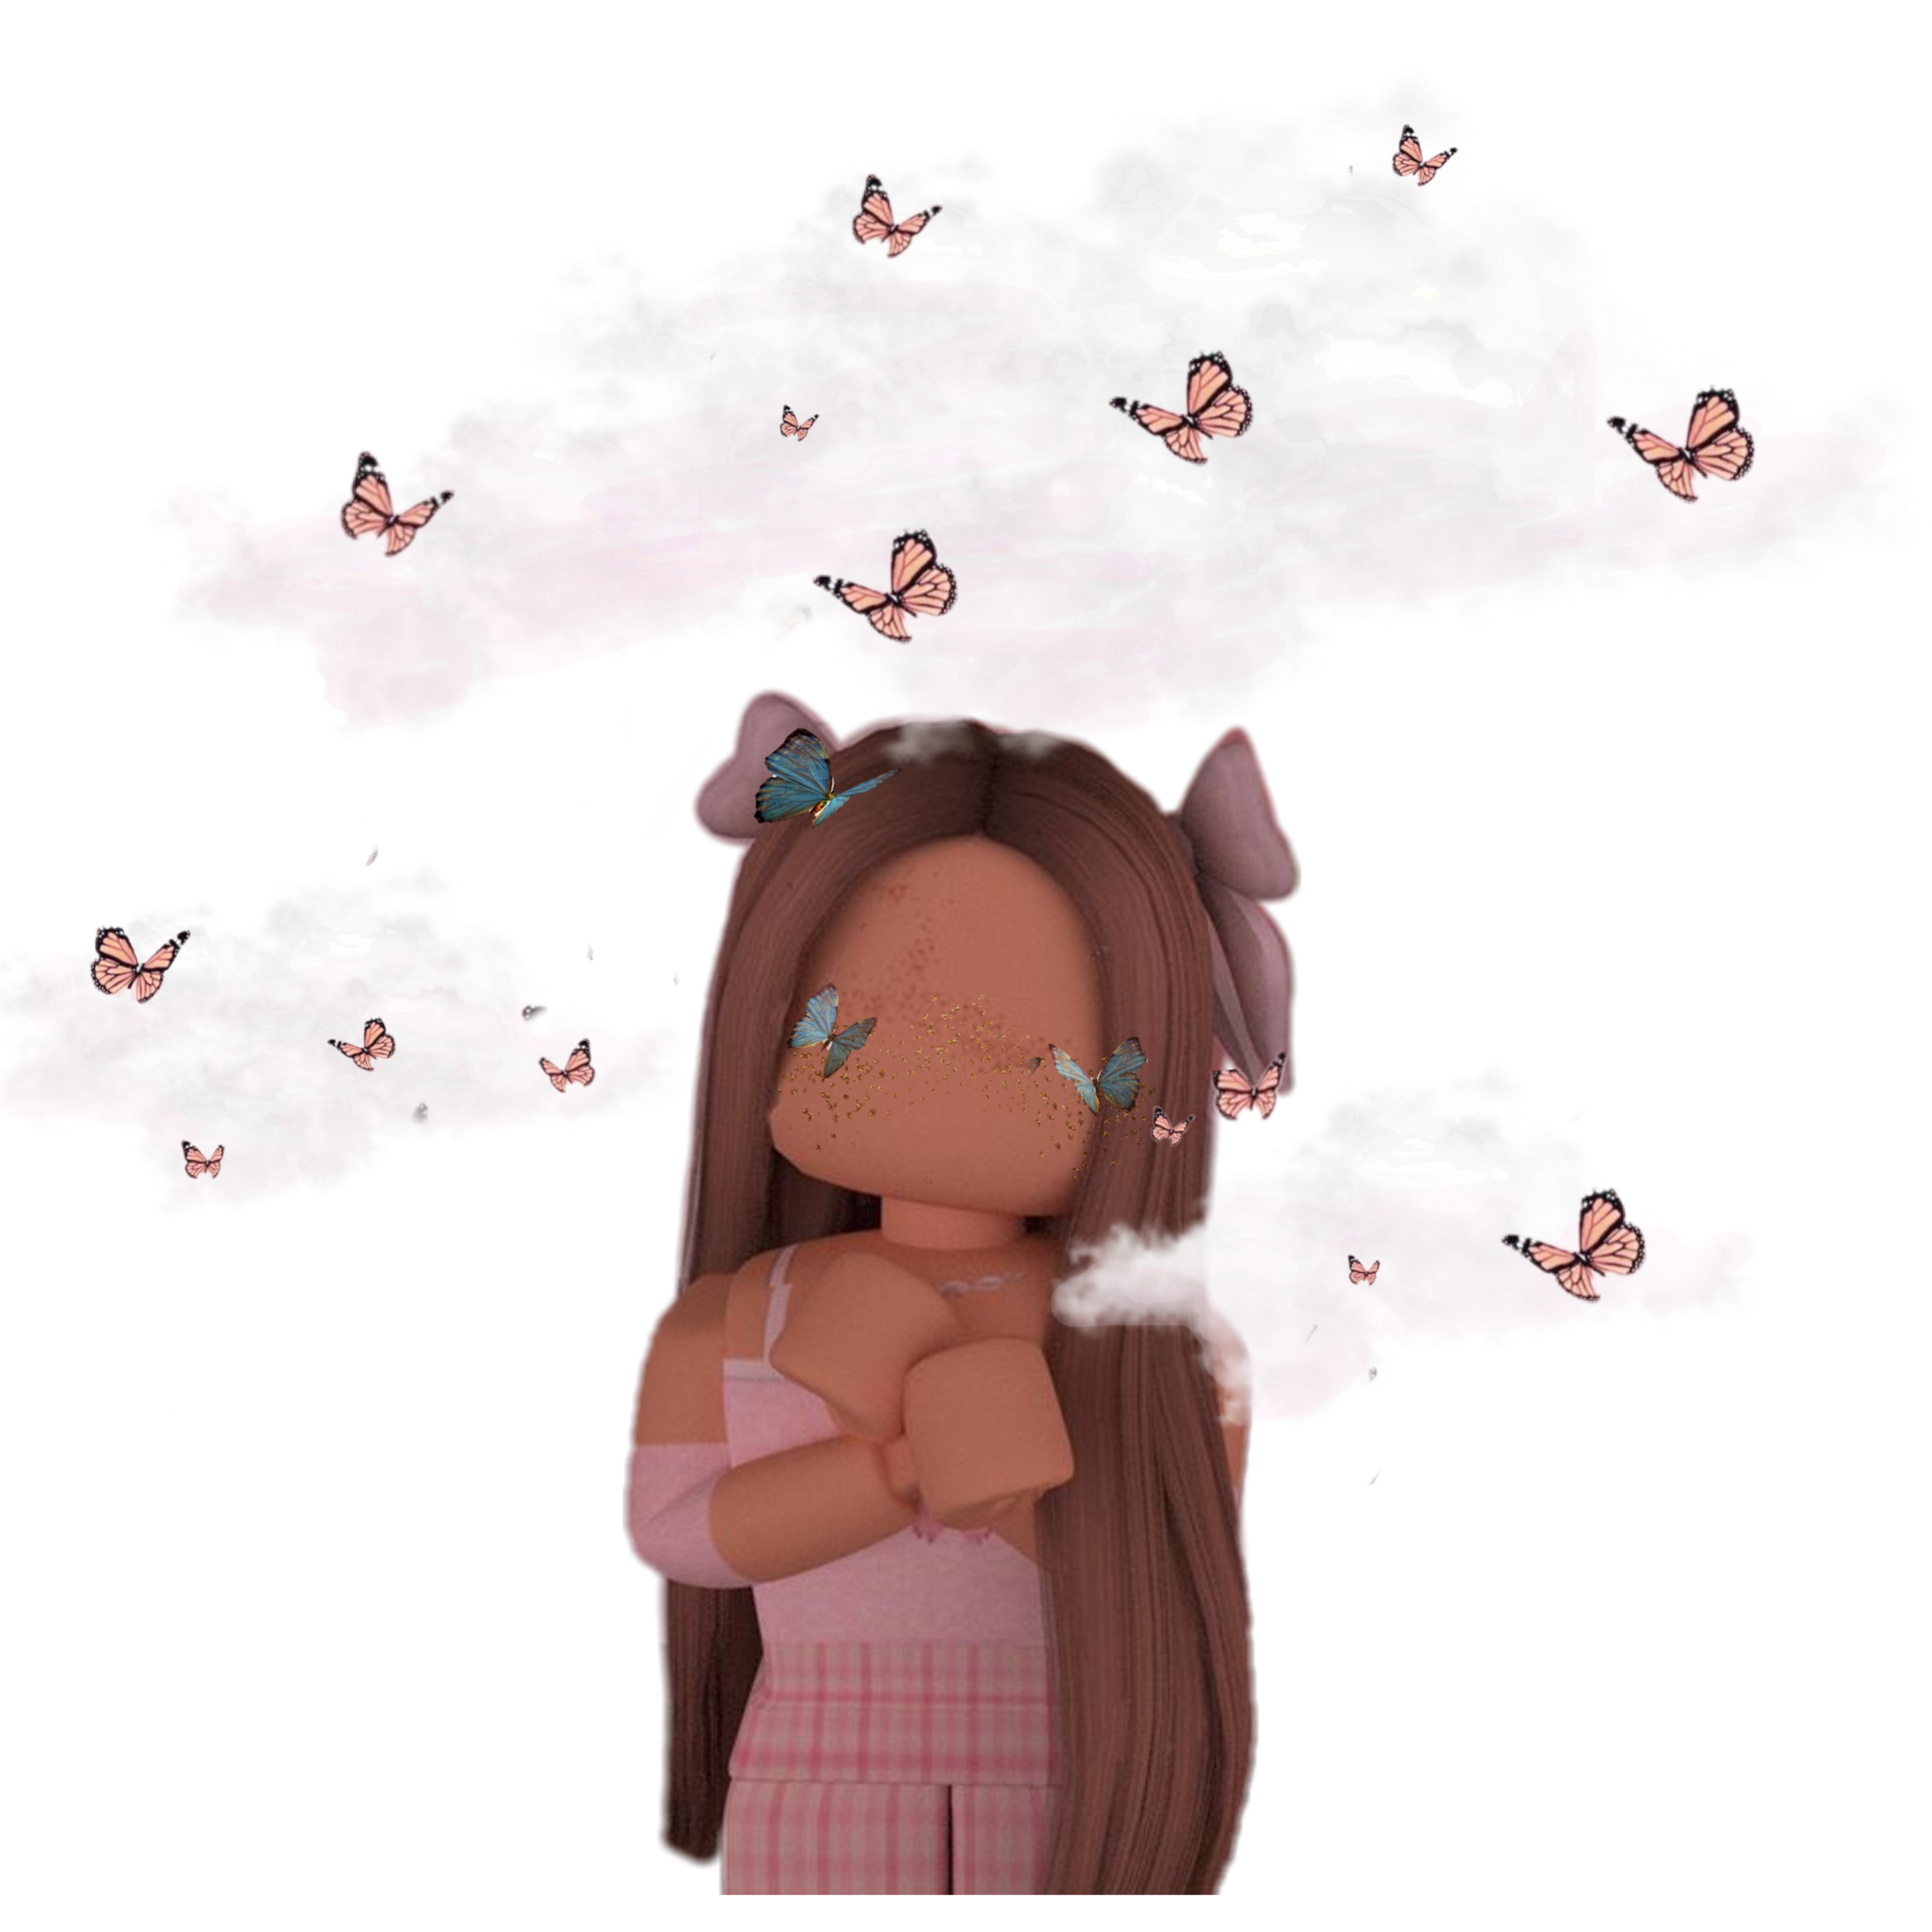 Sticker By 𝒜ℯ𝓈𝓉𝒽ℯ𝓉𝒾𝒸𝓈 By 𝓁ℯ𝓍𝒾 - roblox girl aesthetic brown hair